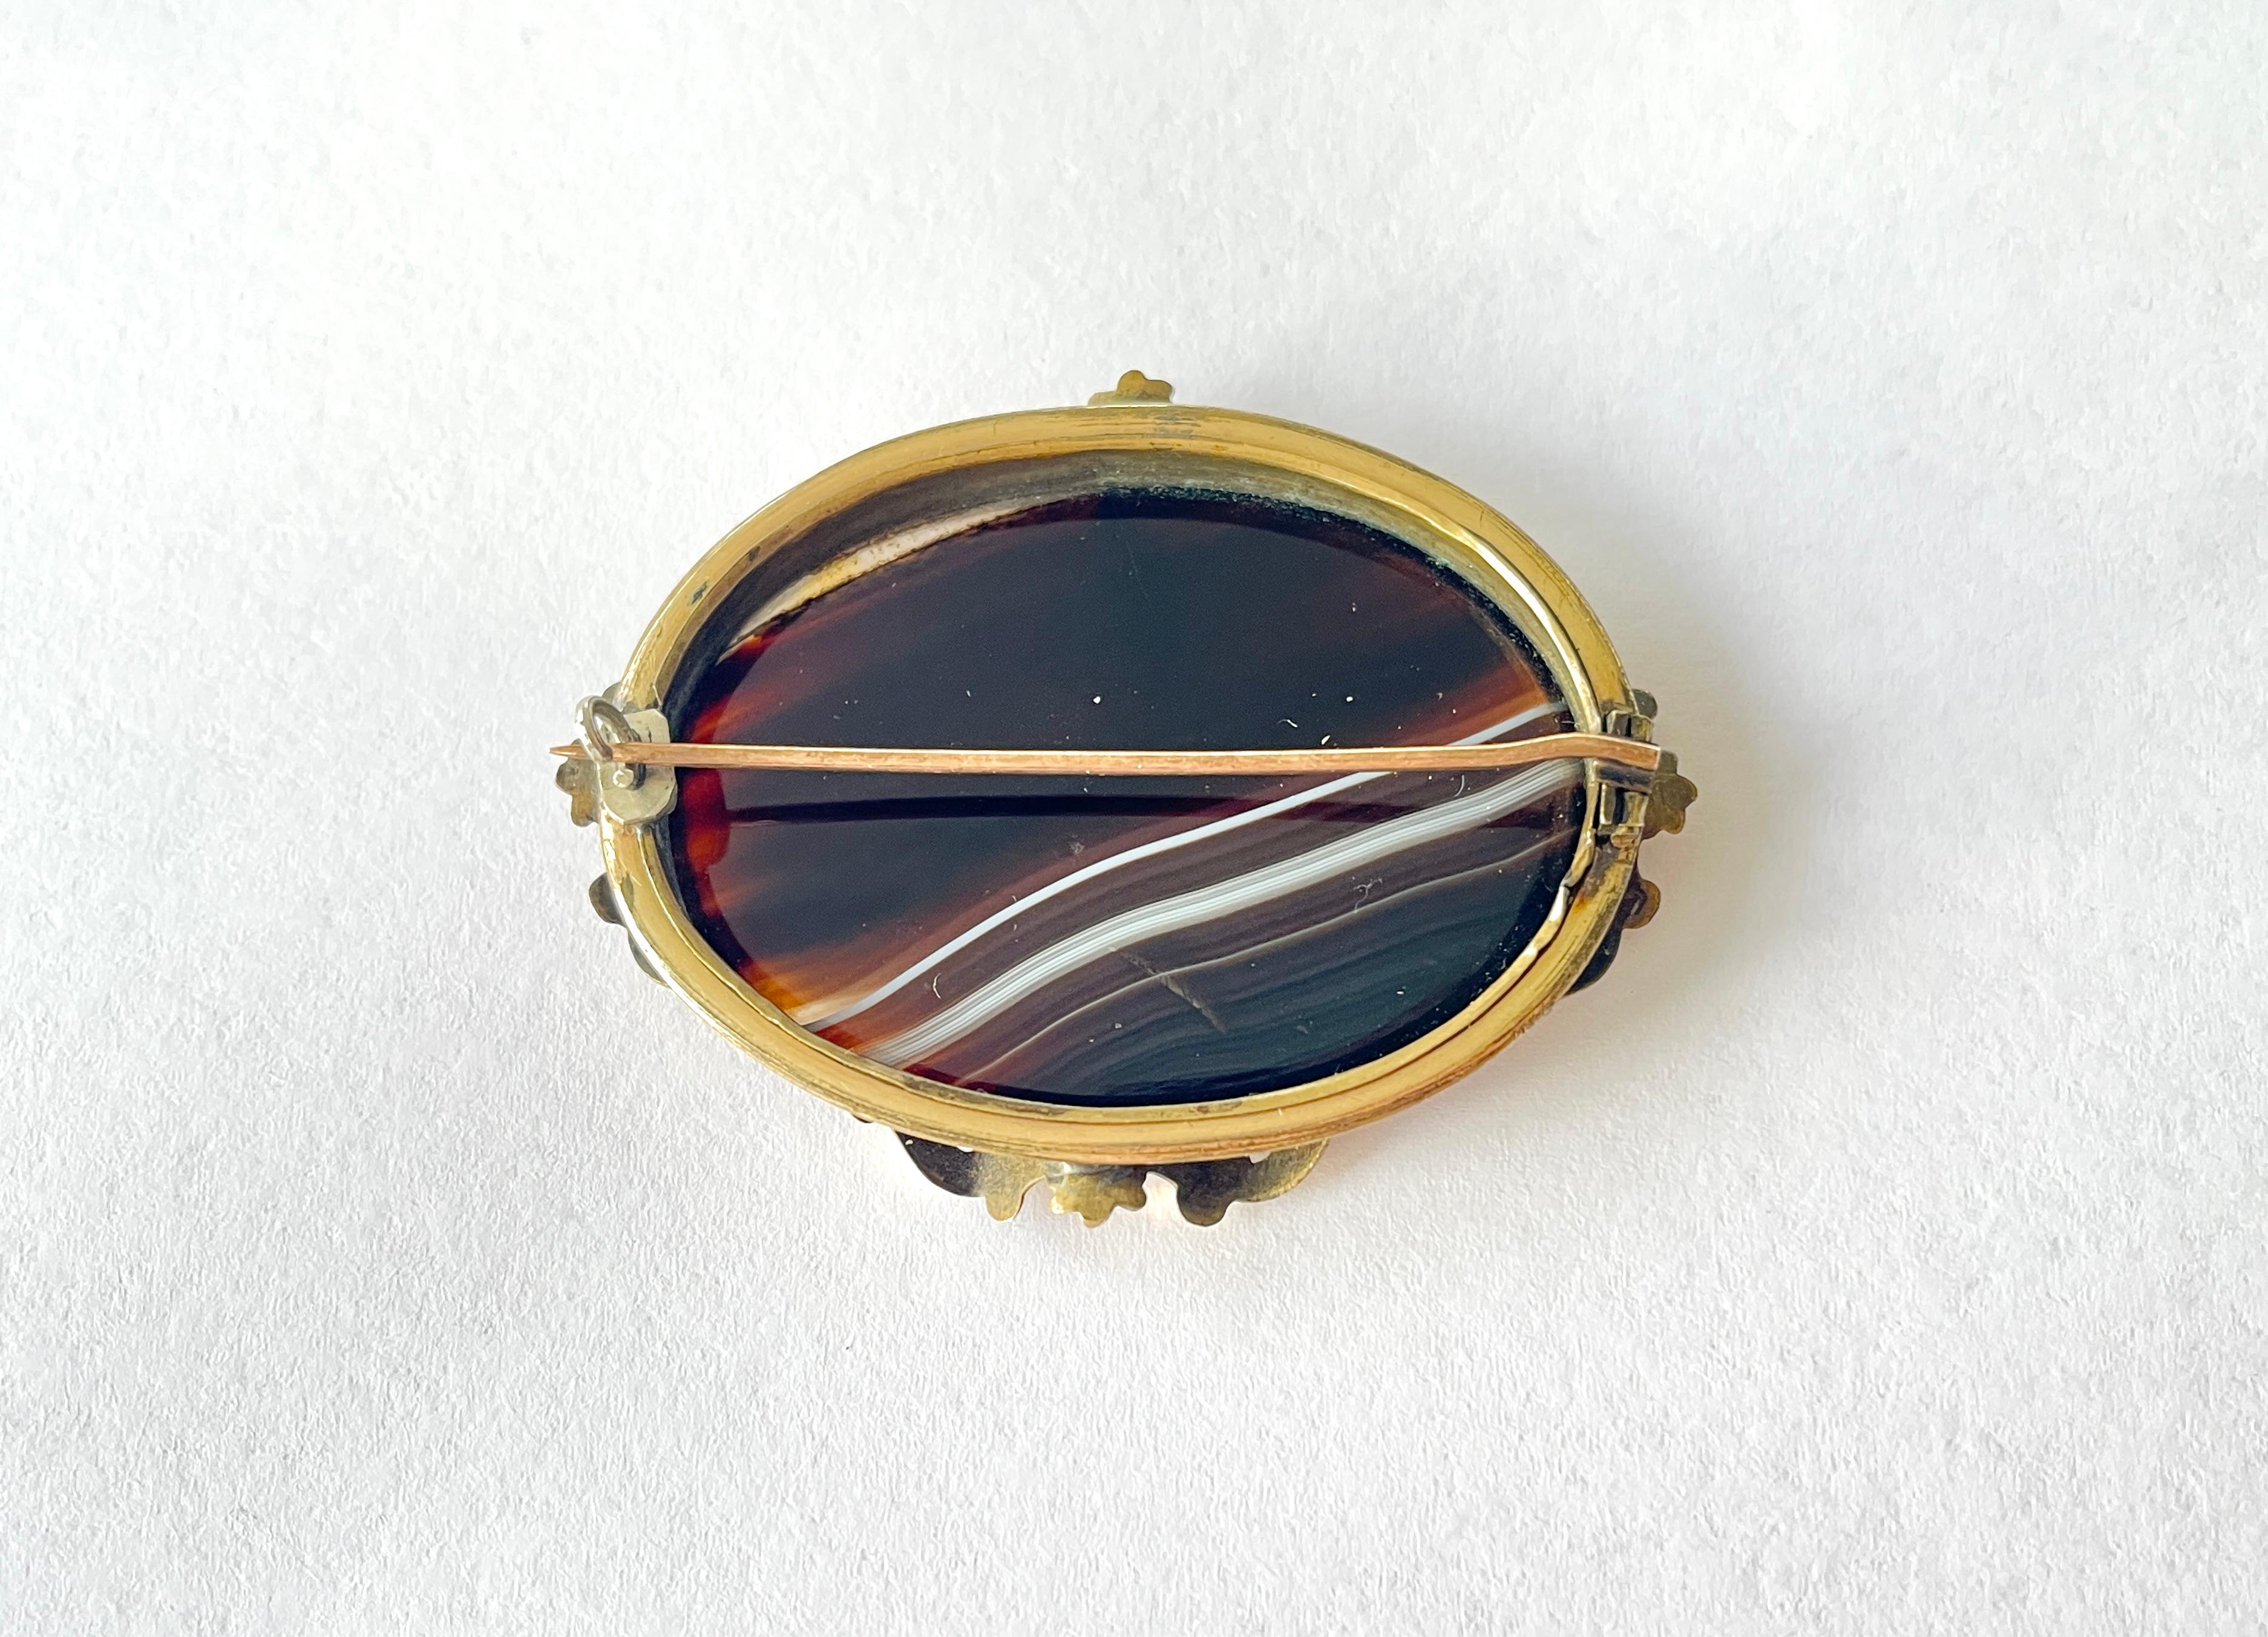 Late Victorian Large Antique Victorian Banded Agate Brooch c1890s Gold Gilt Good Condition For Sale